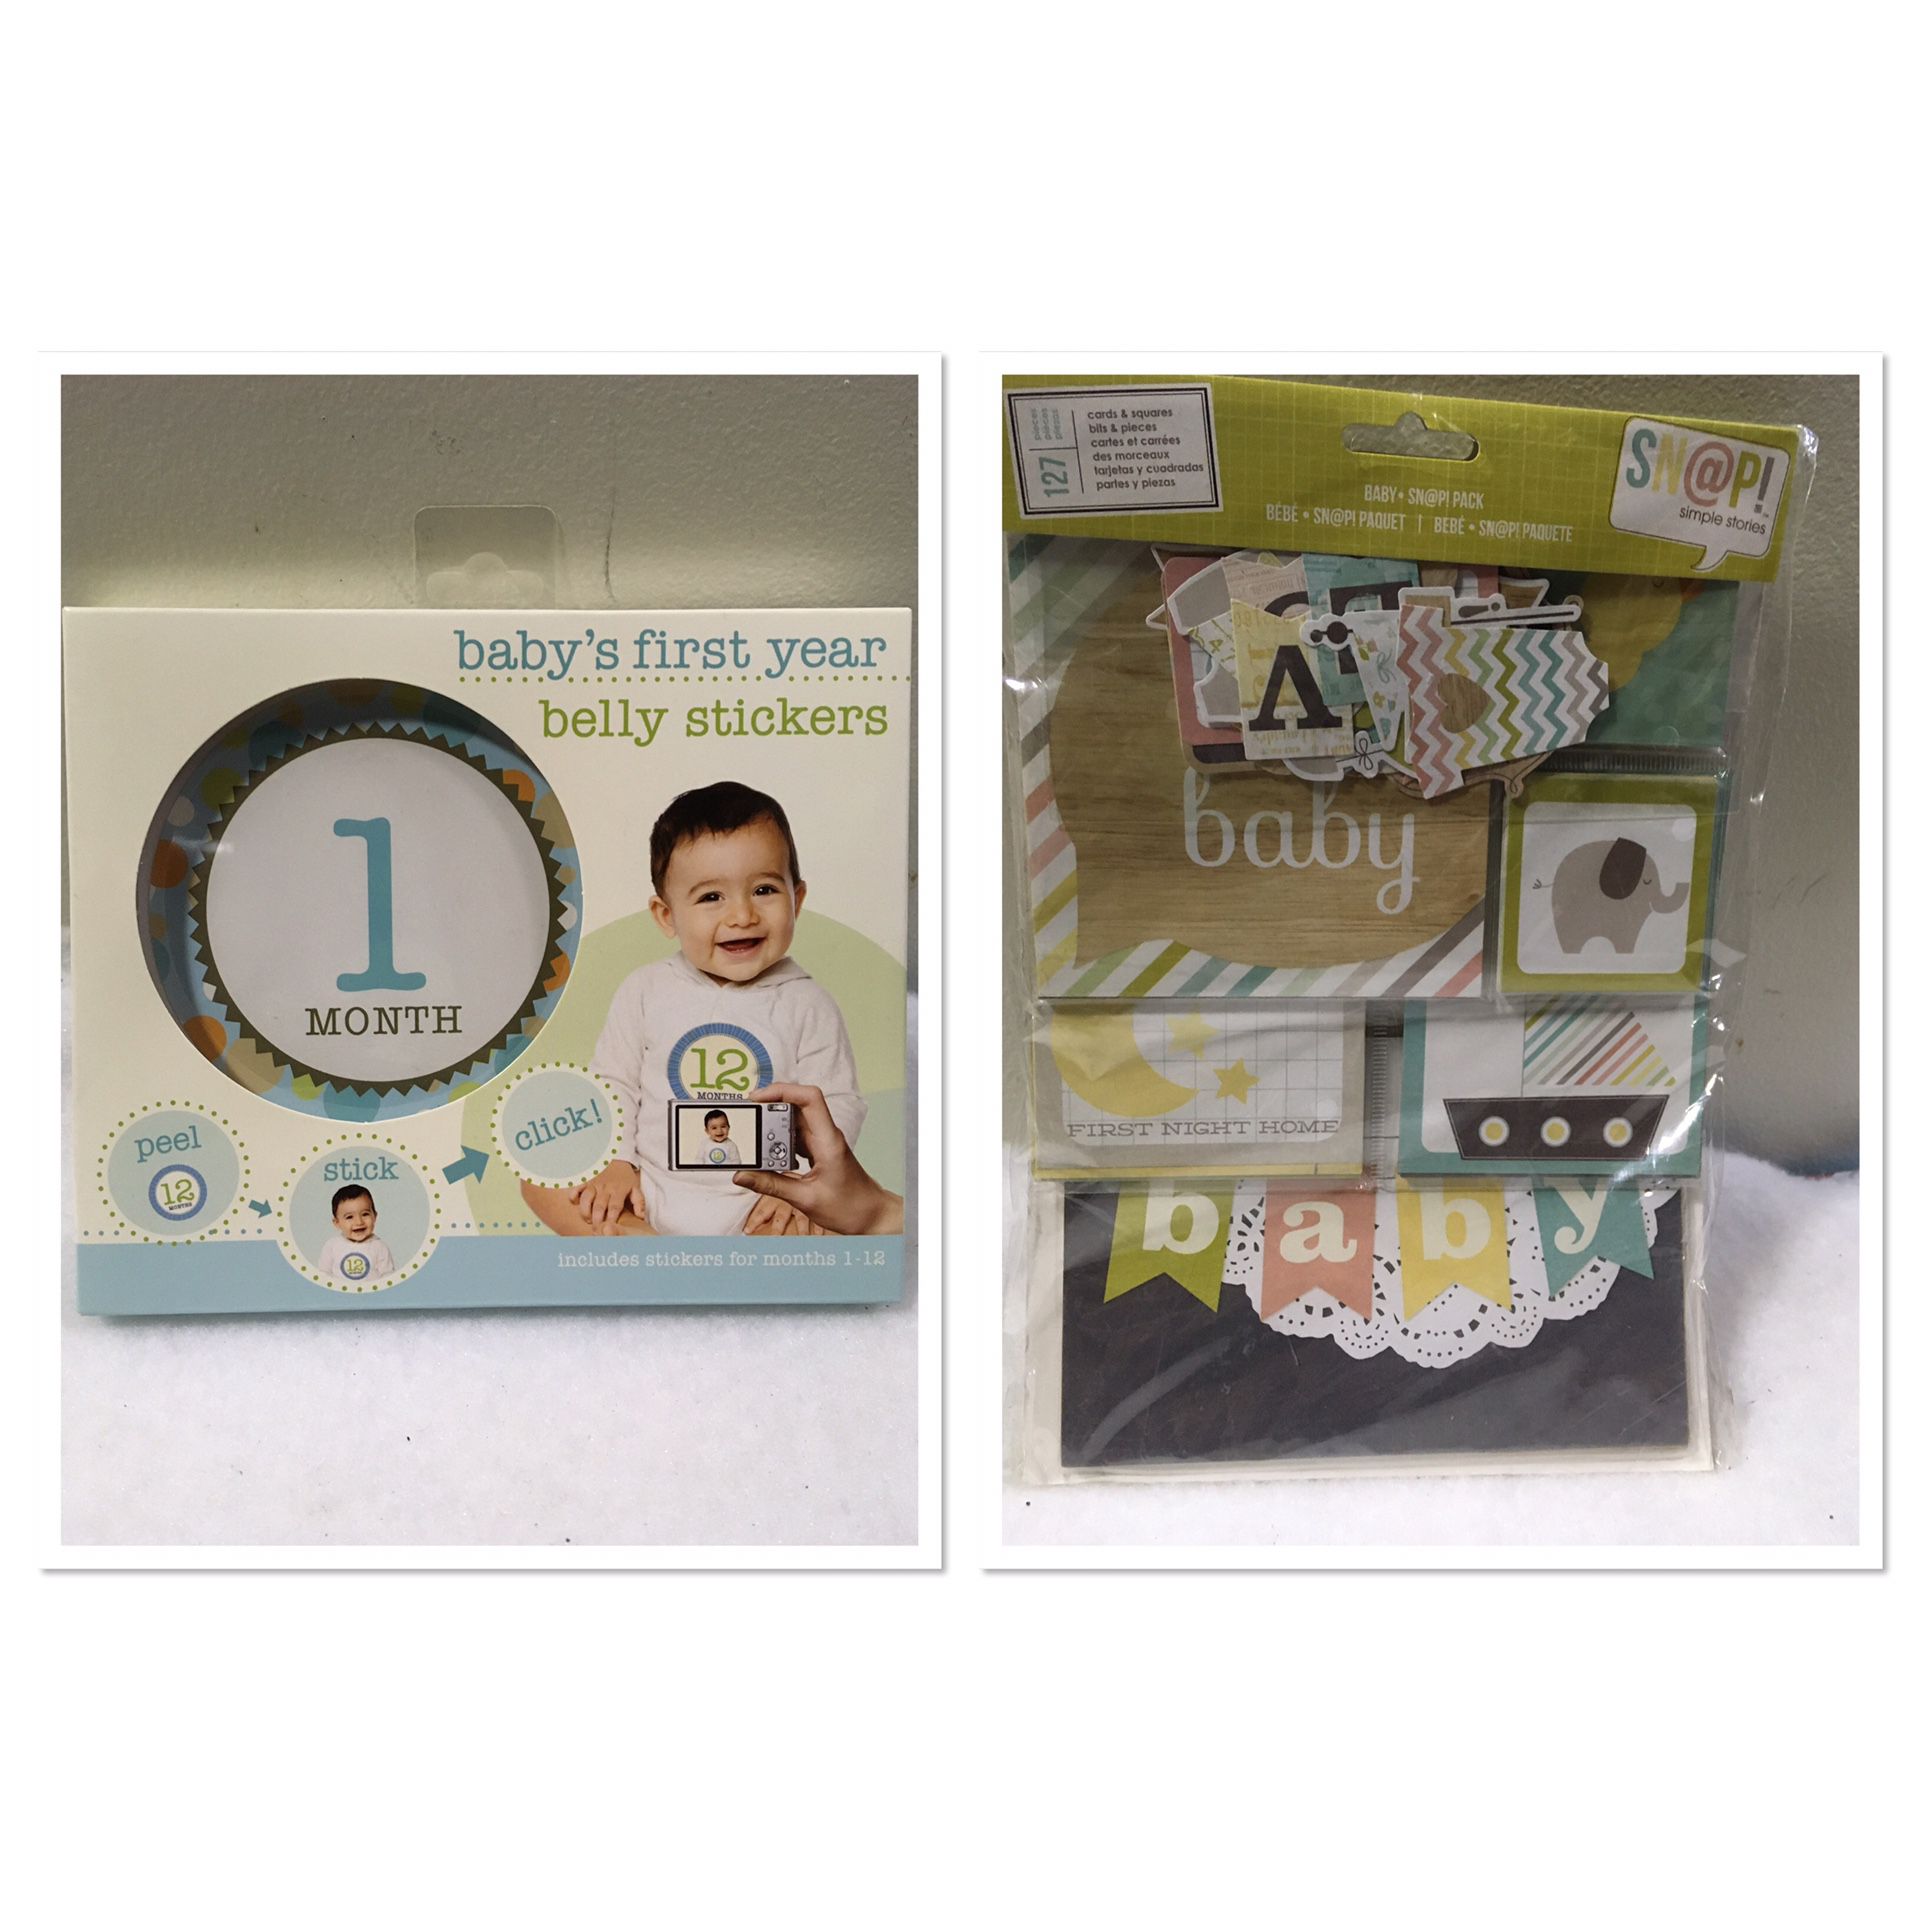 New baby first year belly stickers and scrapbook kit